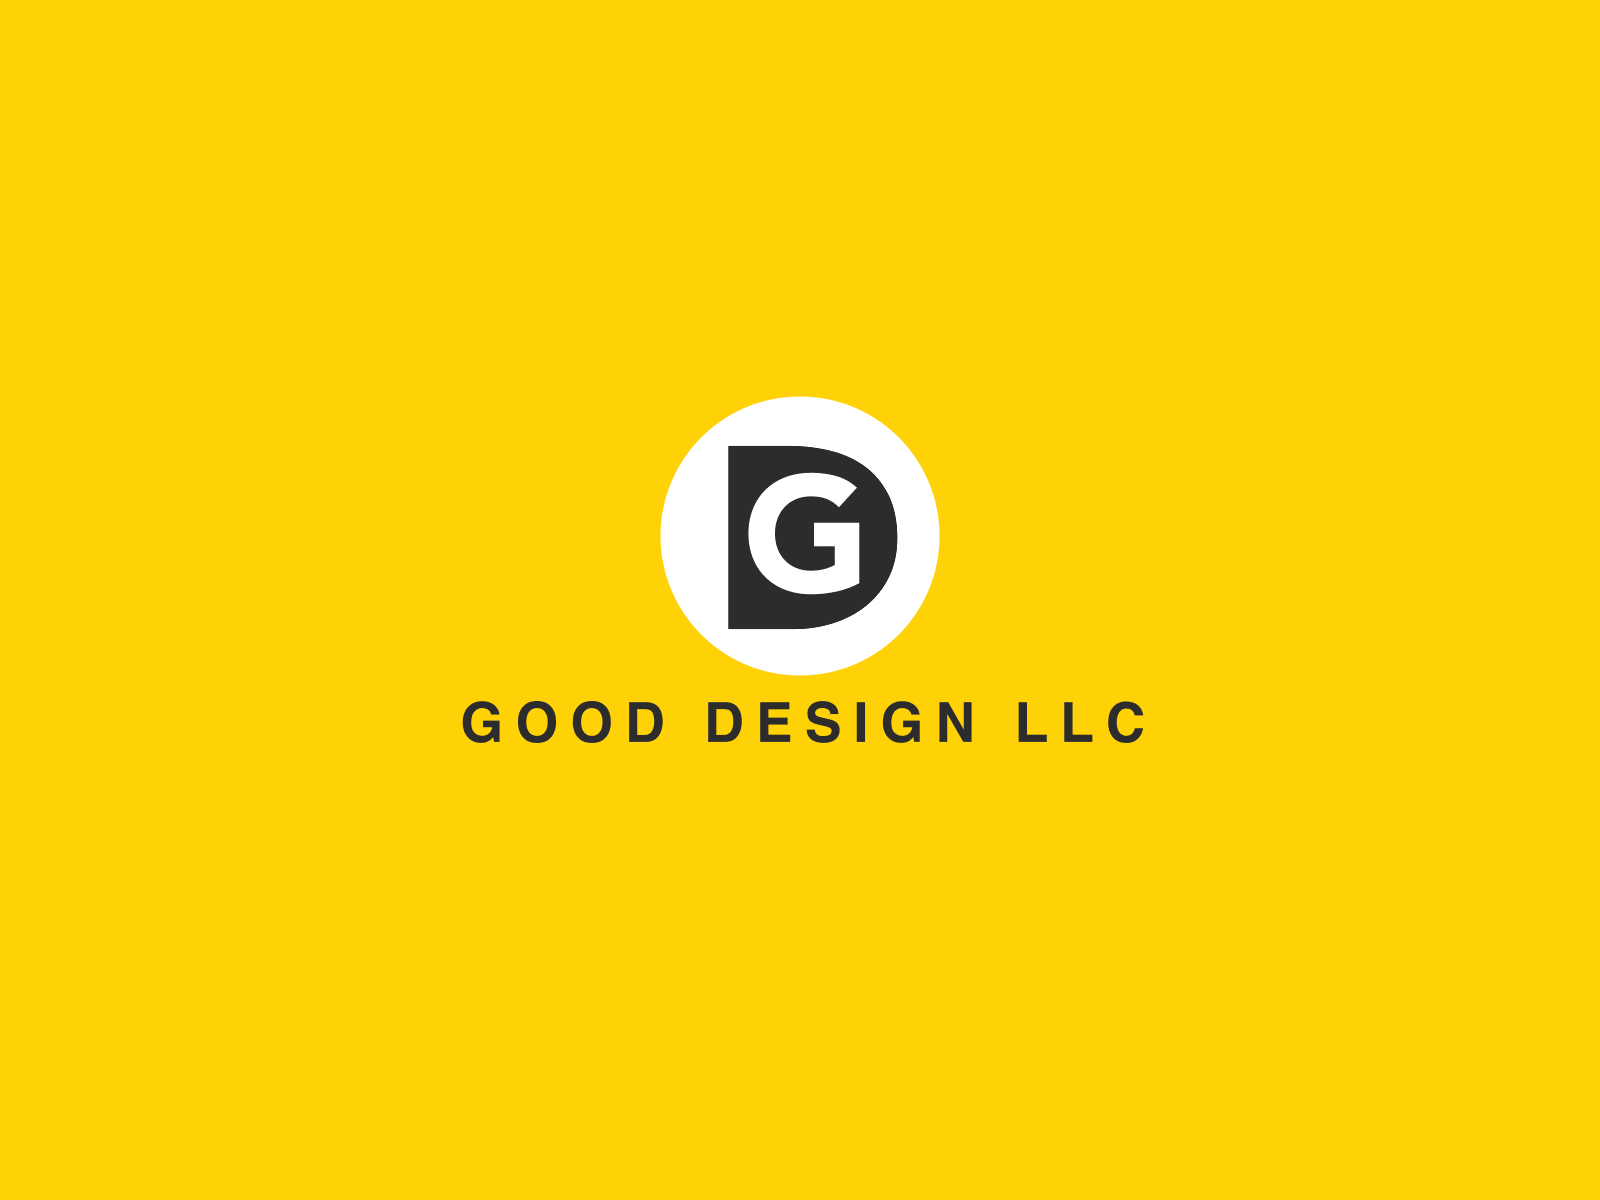 Good Design Logo Motion - Drop and Spin after effects art direction consulting creative direction good design llc graphic design logo motion graphic motion graphics